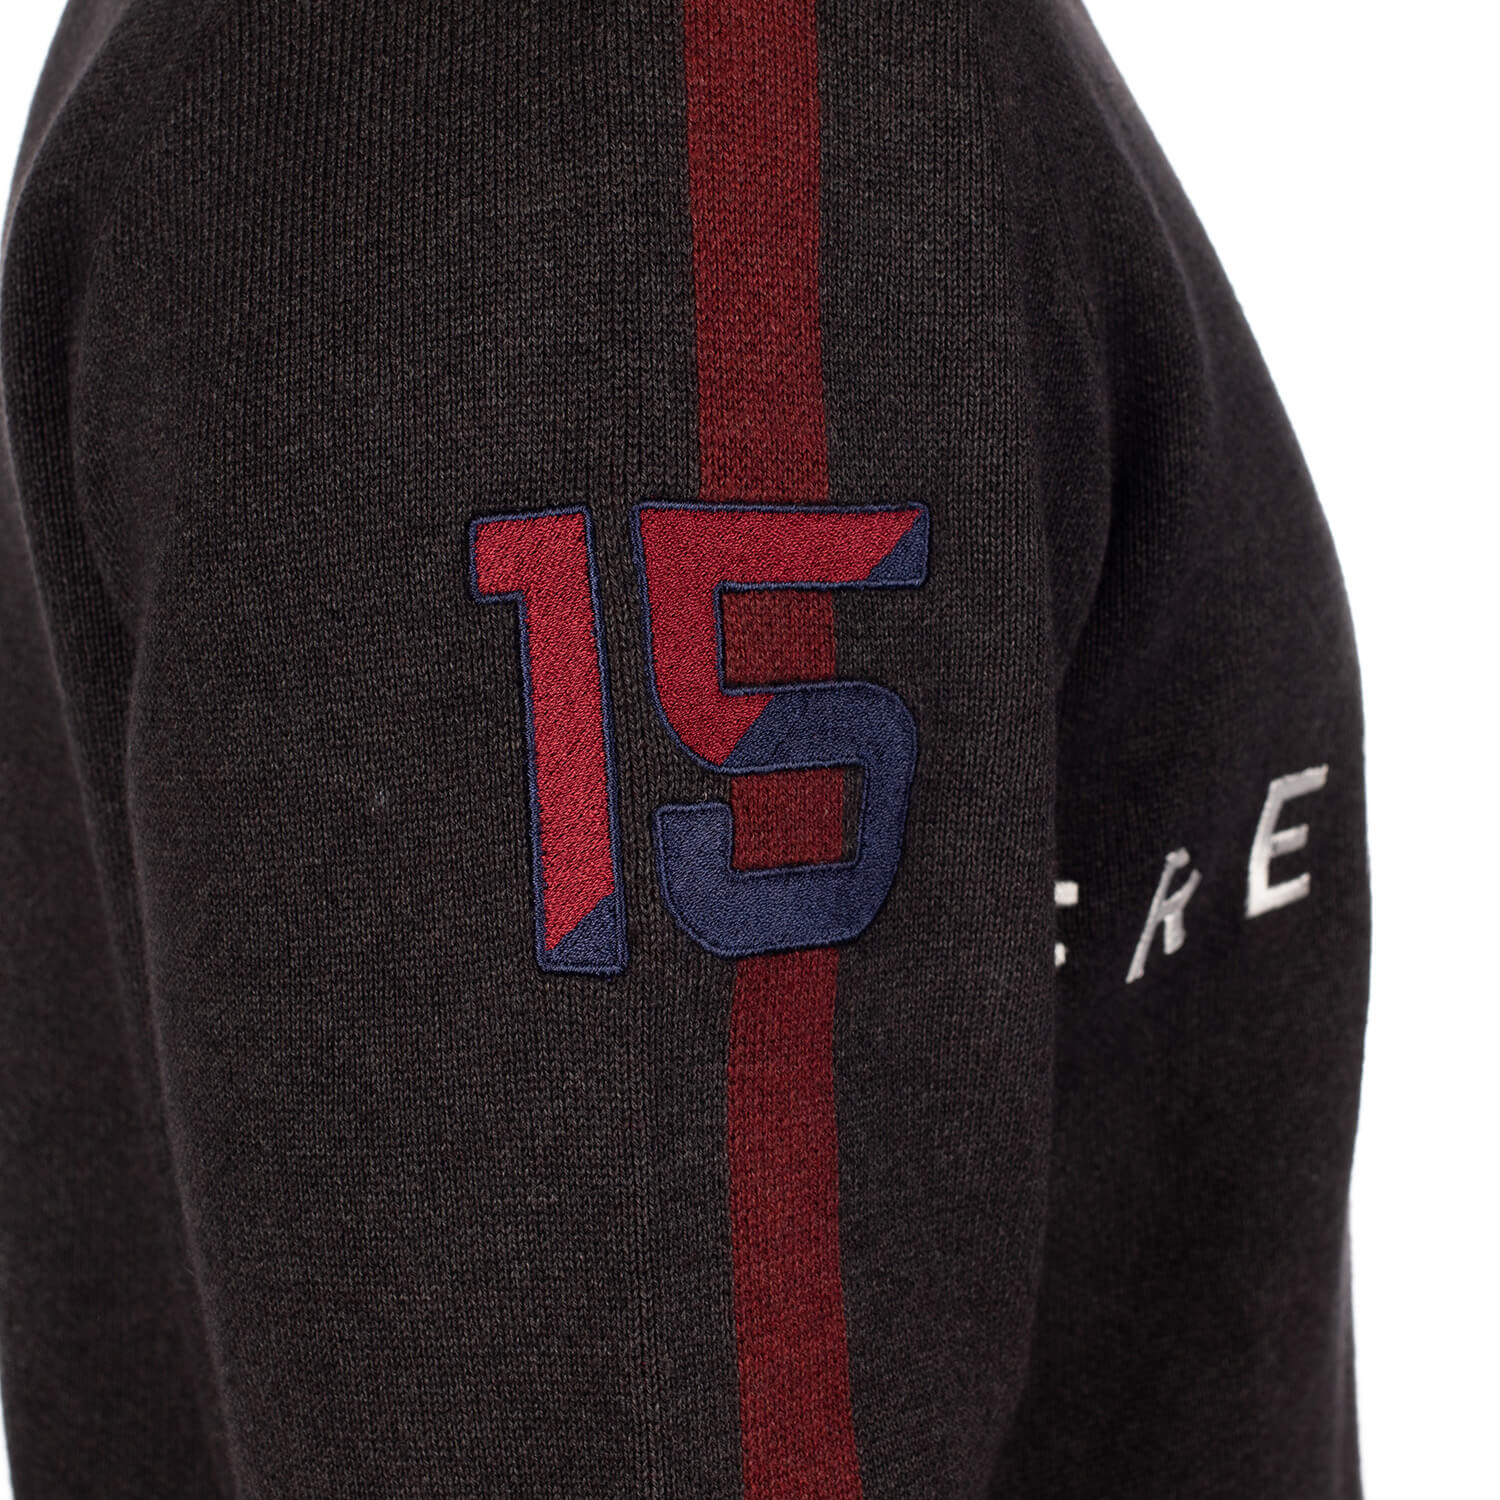 Gilet french rugby